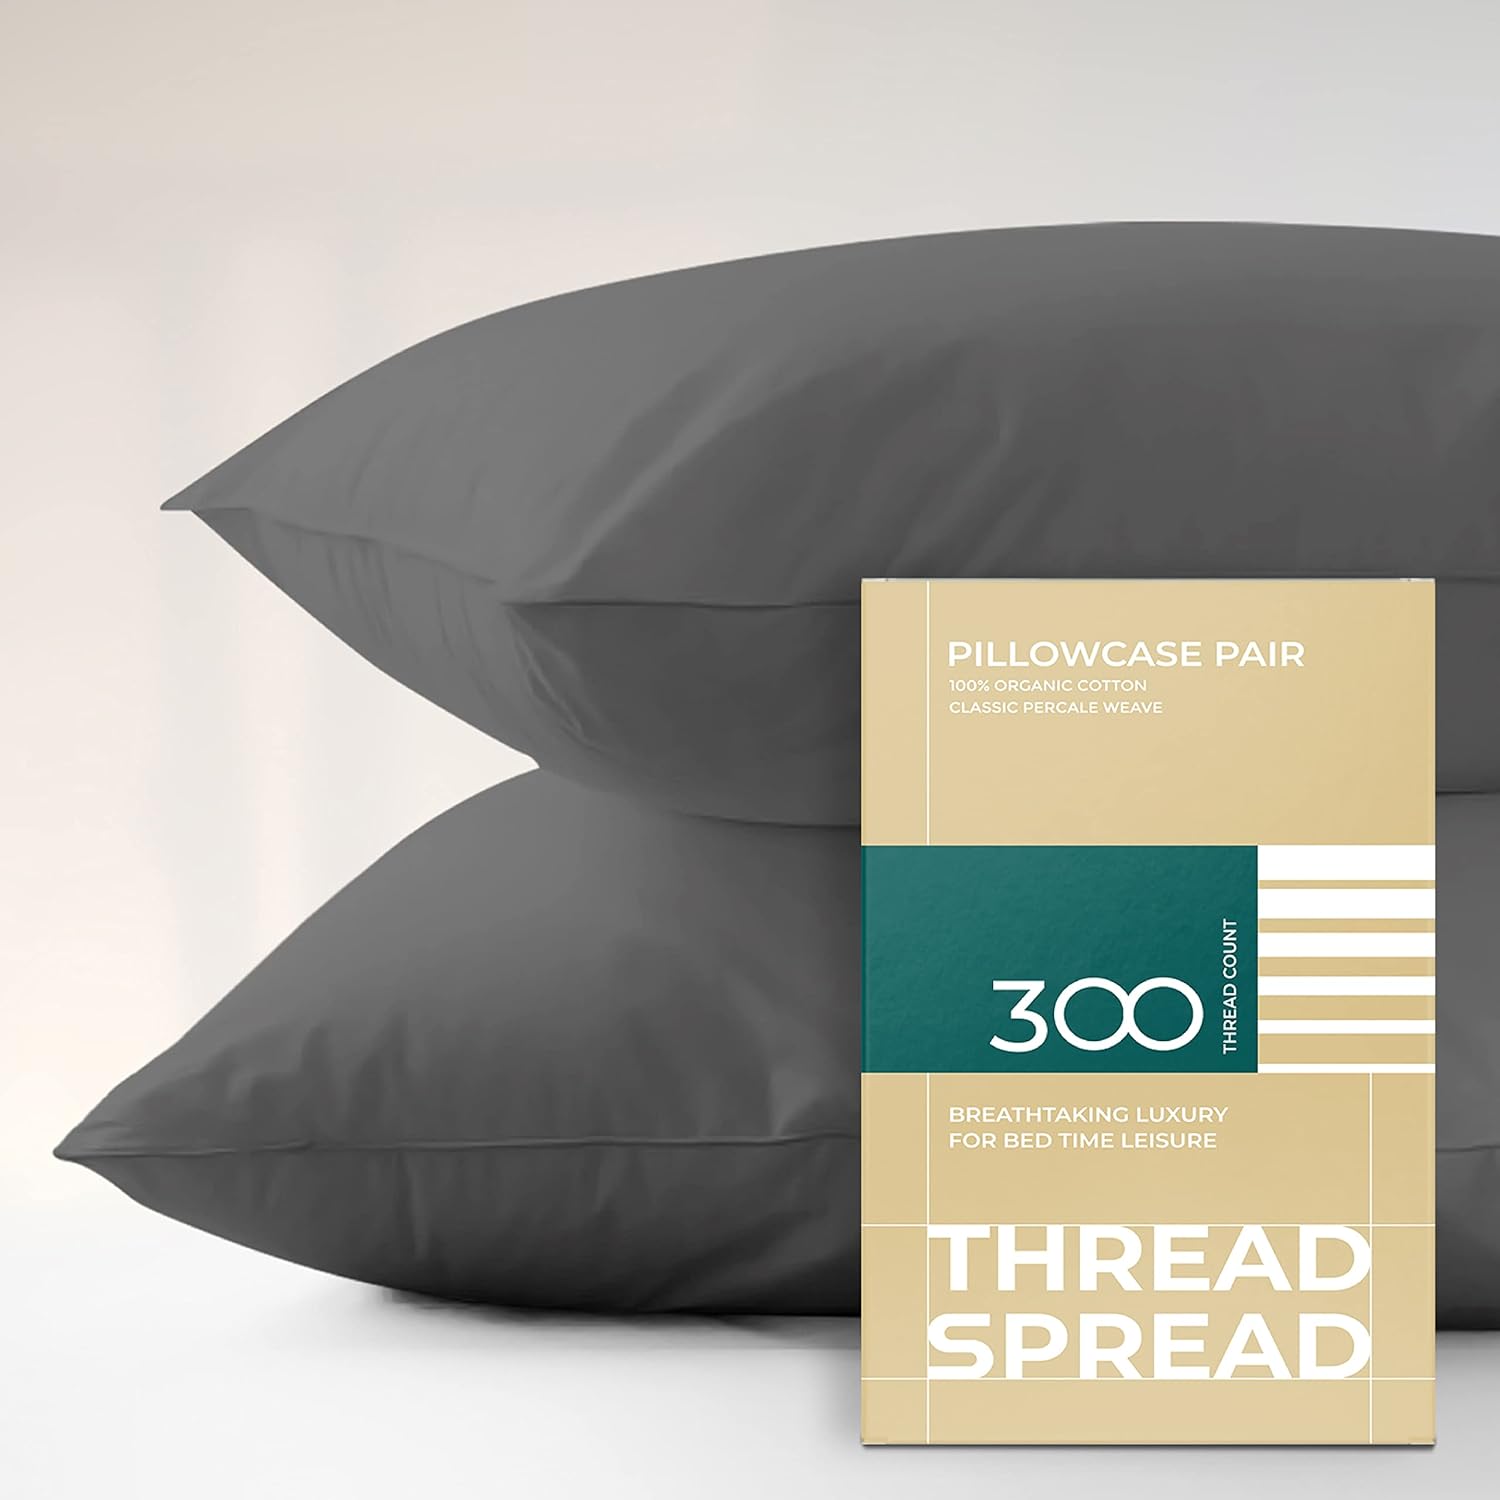 THREAD SPREAD 100% Organic Cotton Pillowcases - Soft and Crisp, Cooling Percale Weave, Breathable Pillow Covers, Set of 2 (King Size, Dark Gray)